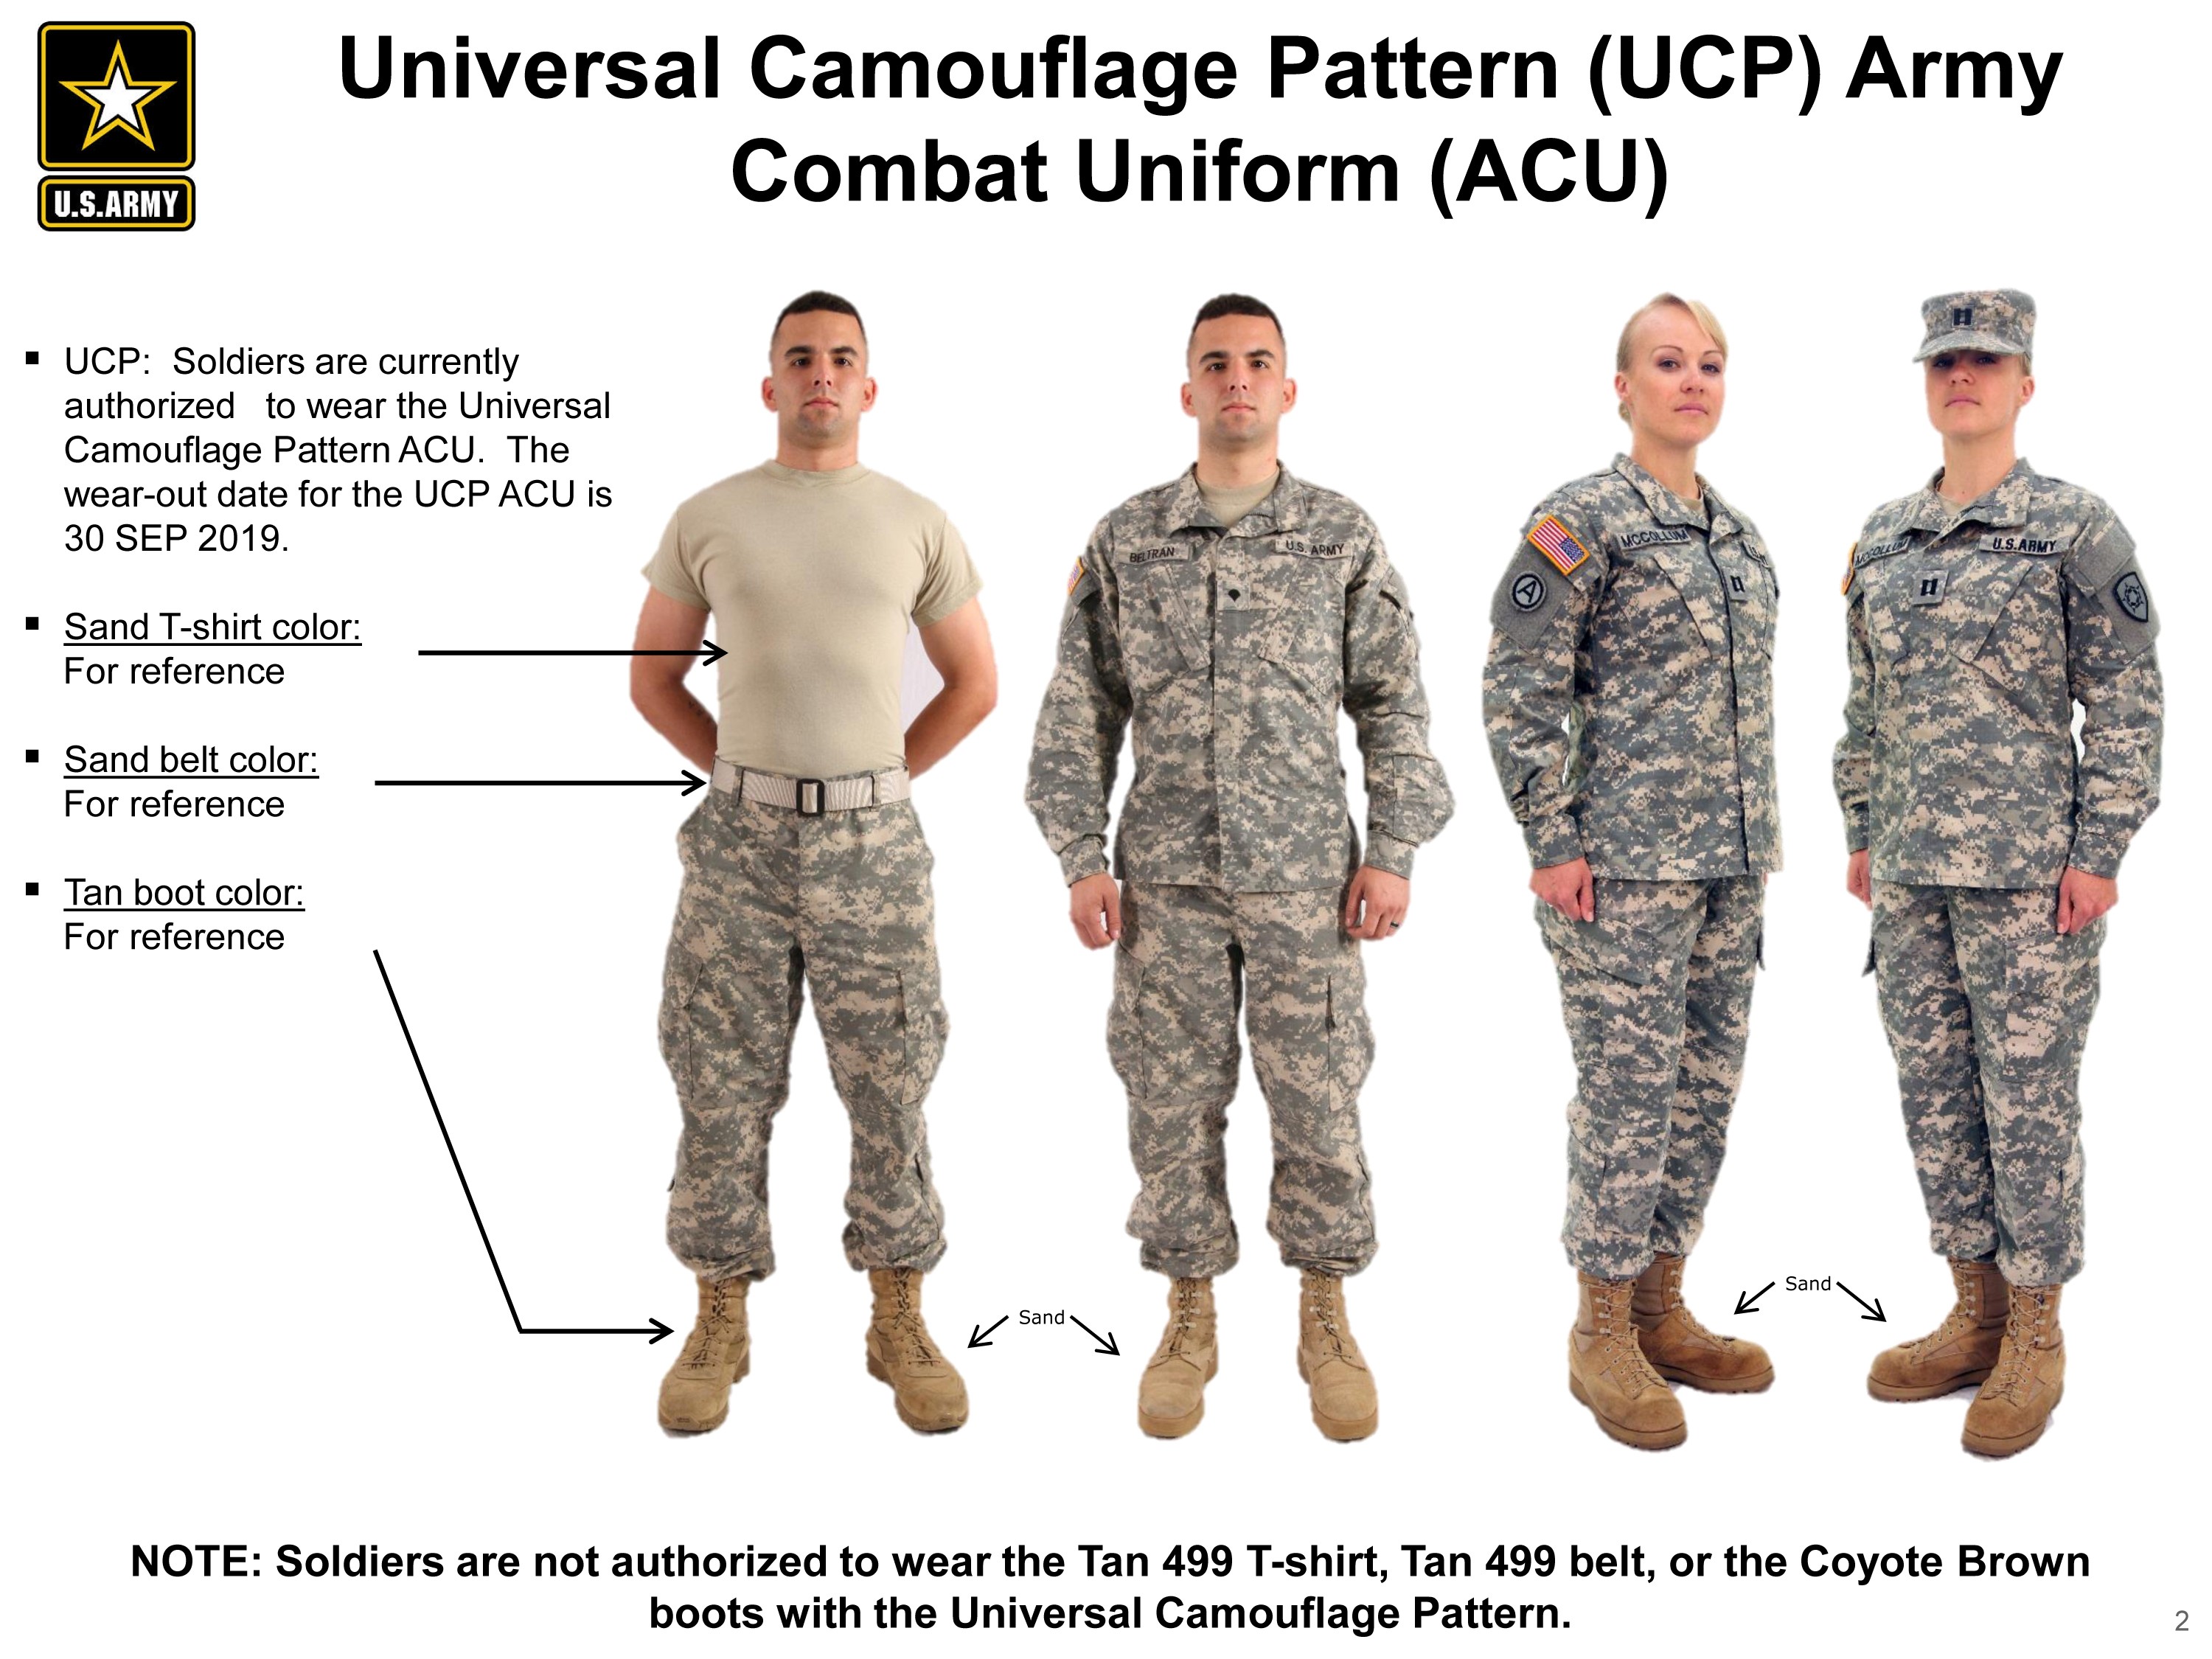 Operational Camouflage Pattern Army Combat Uniforms available July